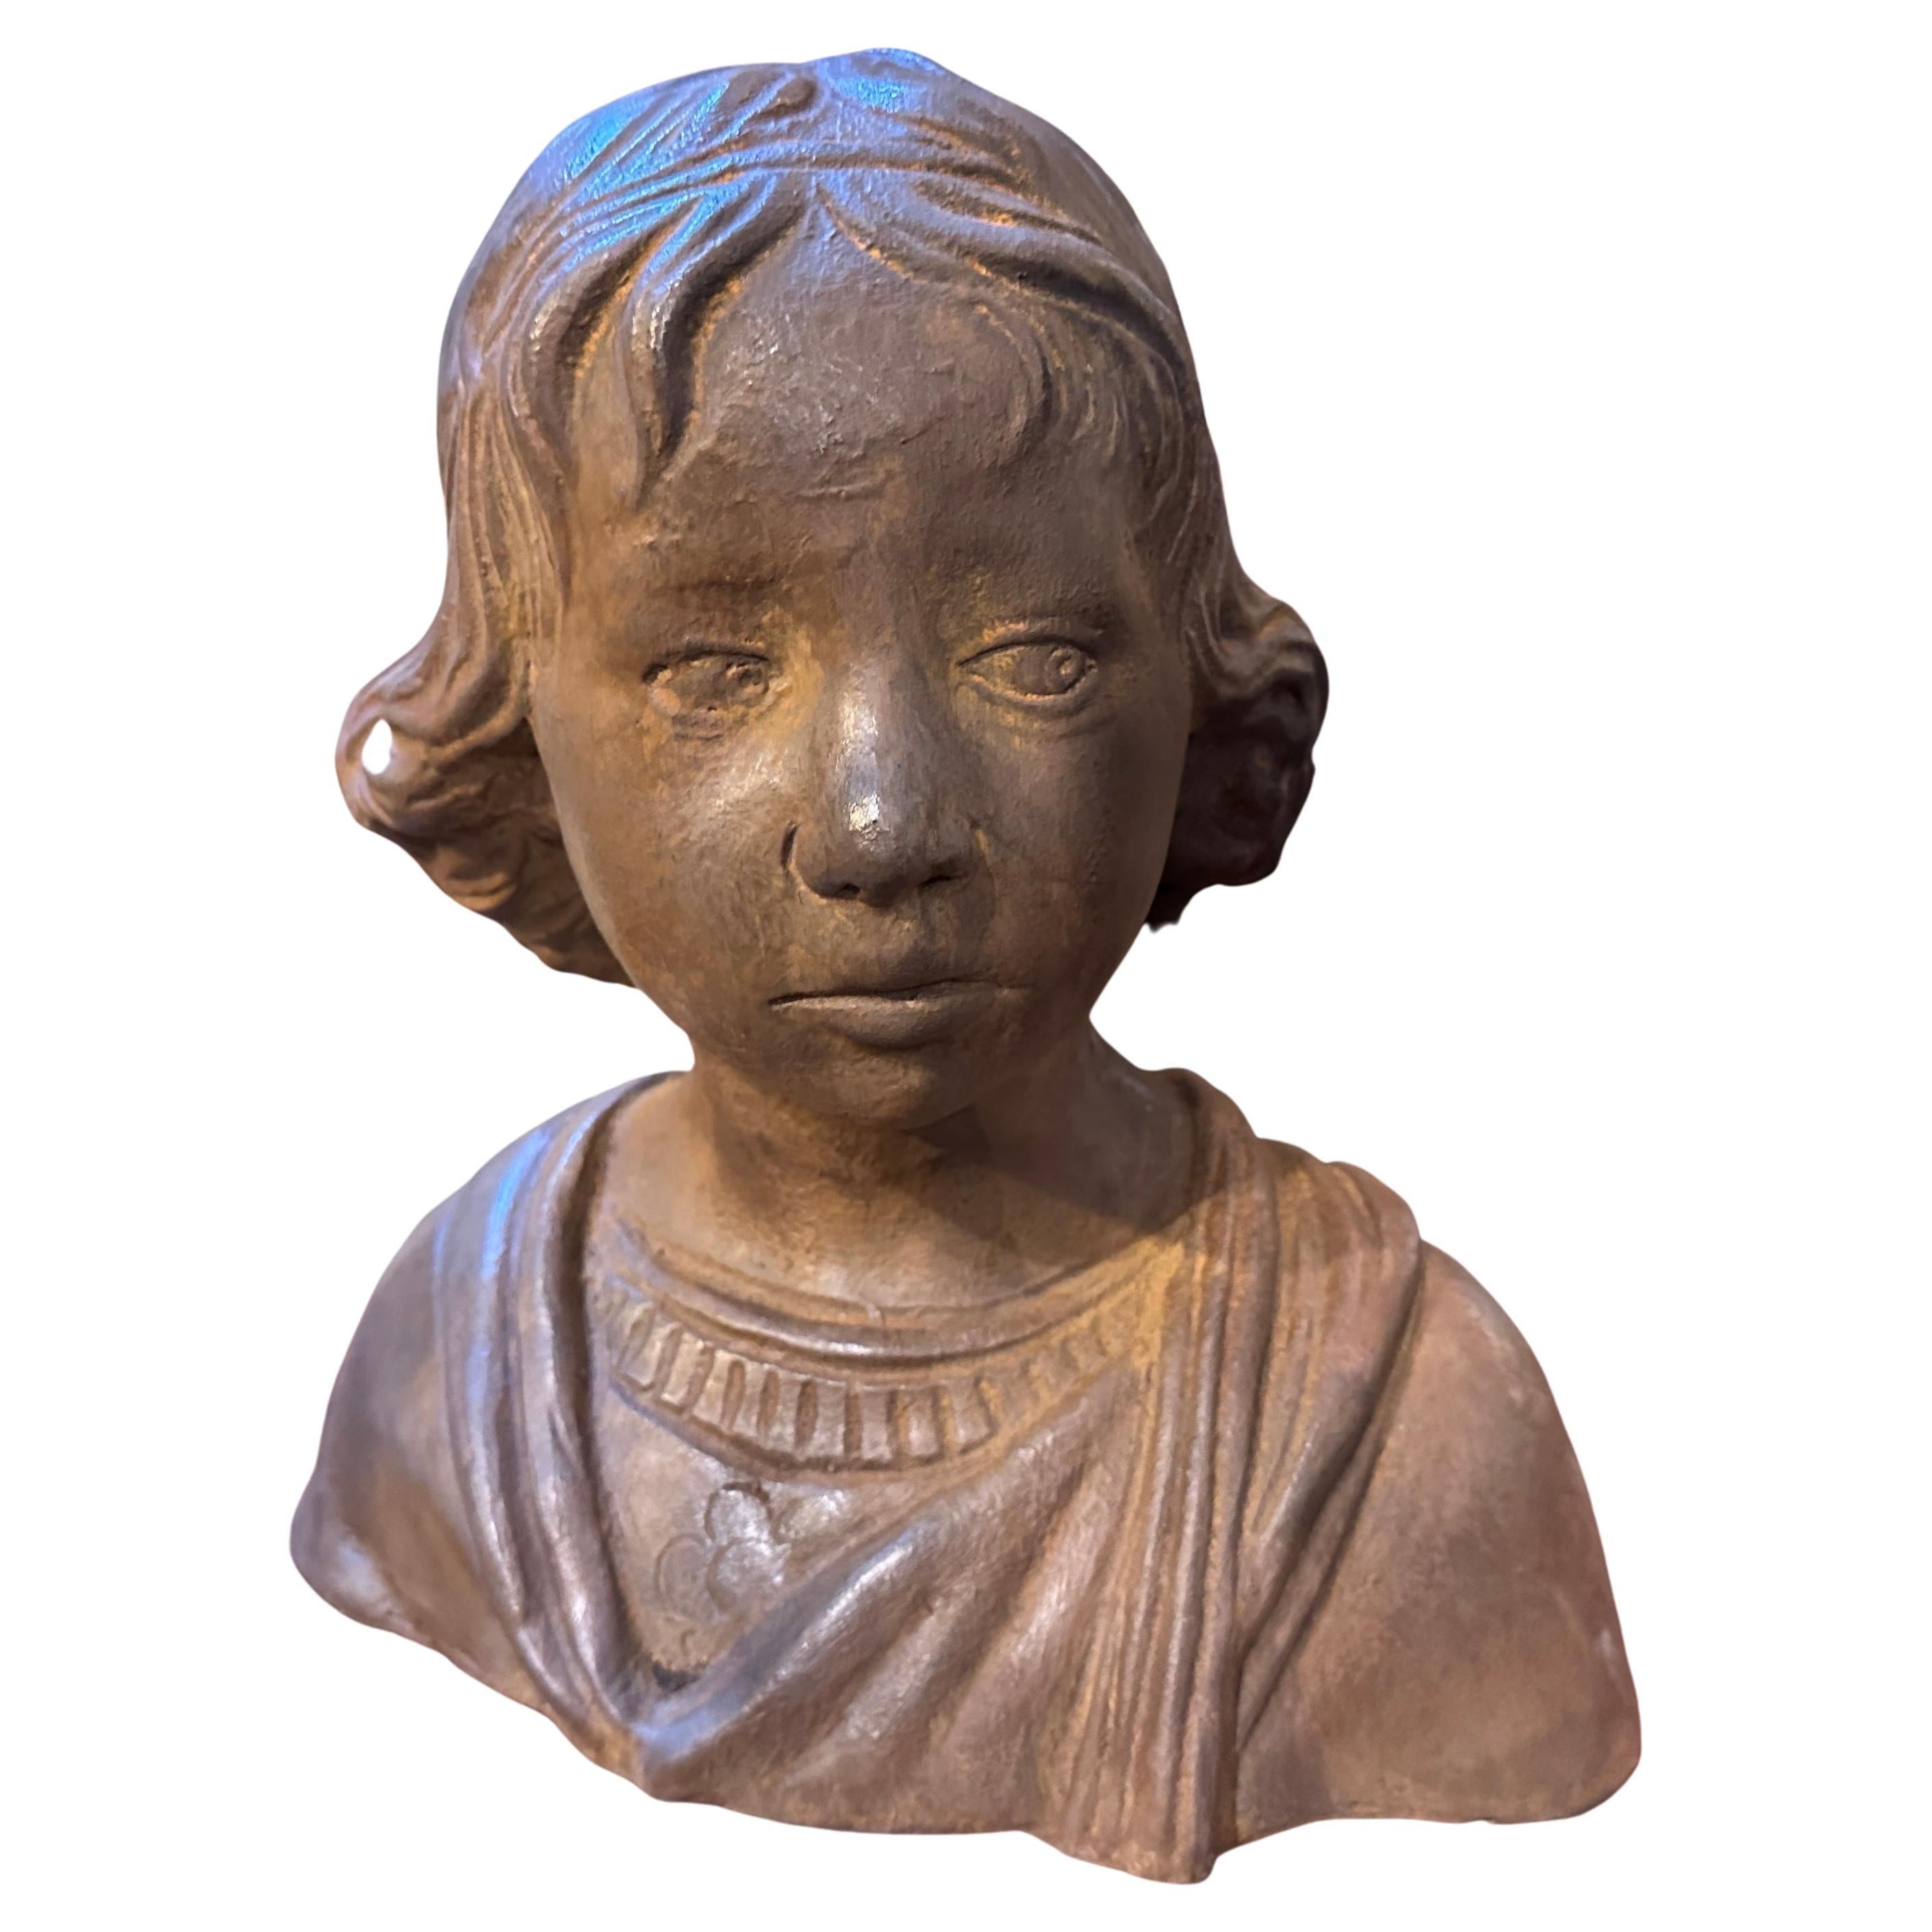 1930s Hand-Crafted Terracotta Sicilian Bust of a Young Girl